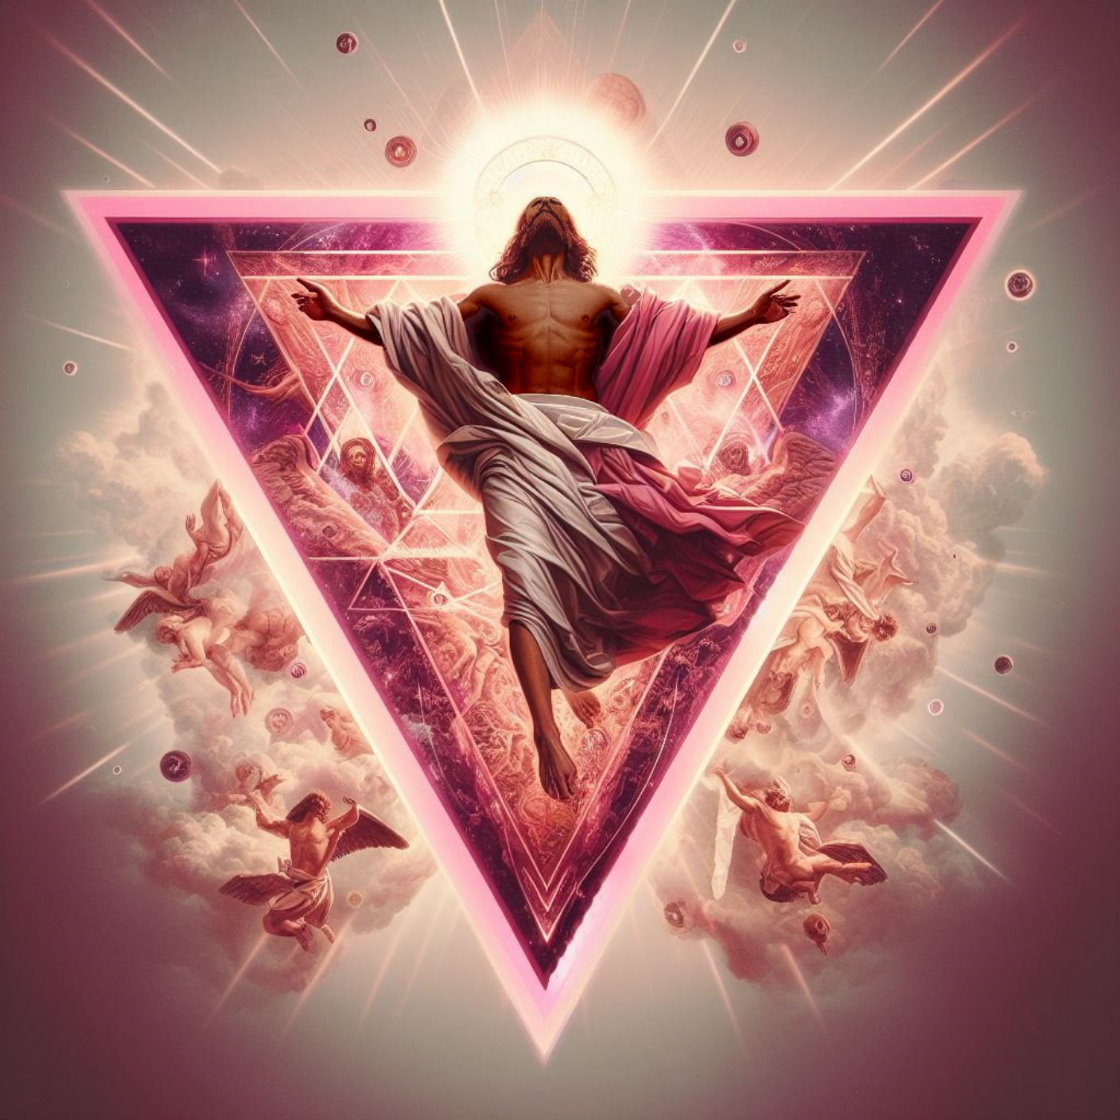 Jesus in front of Pink Triangle